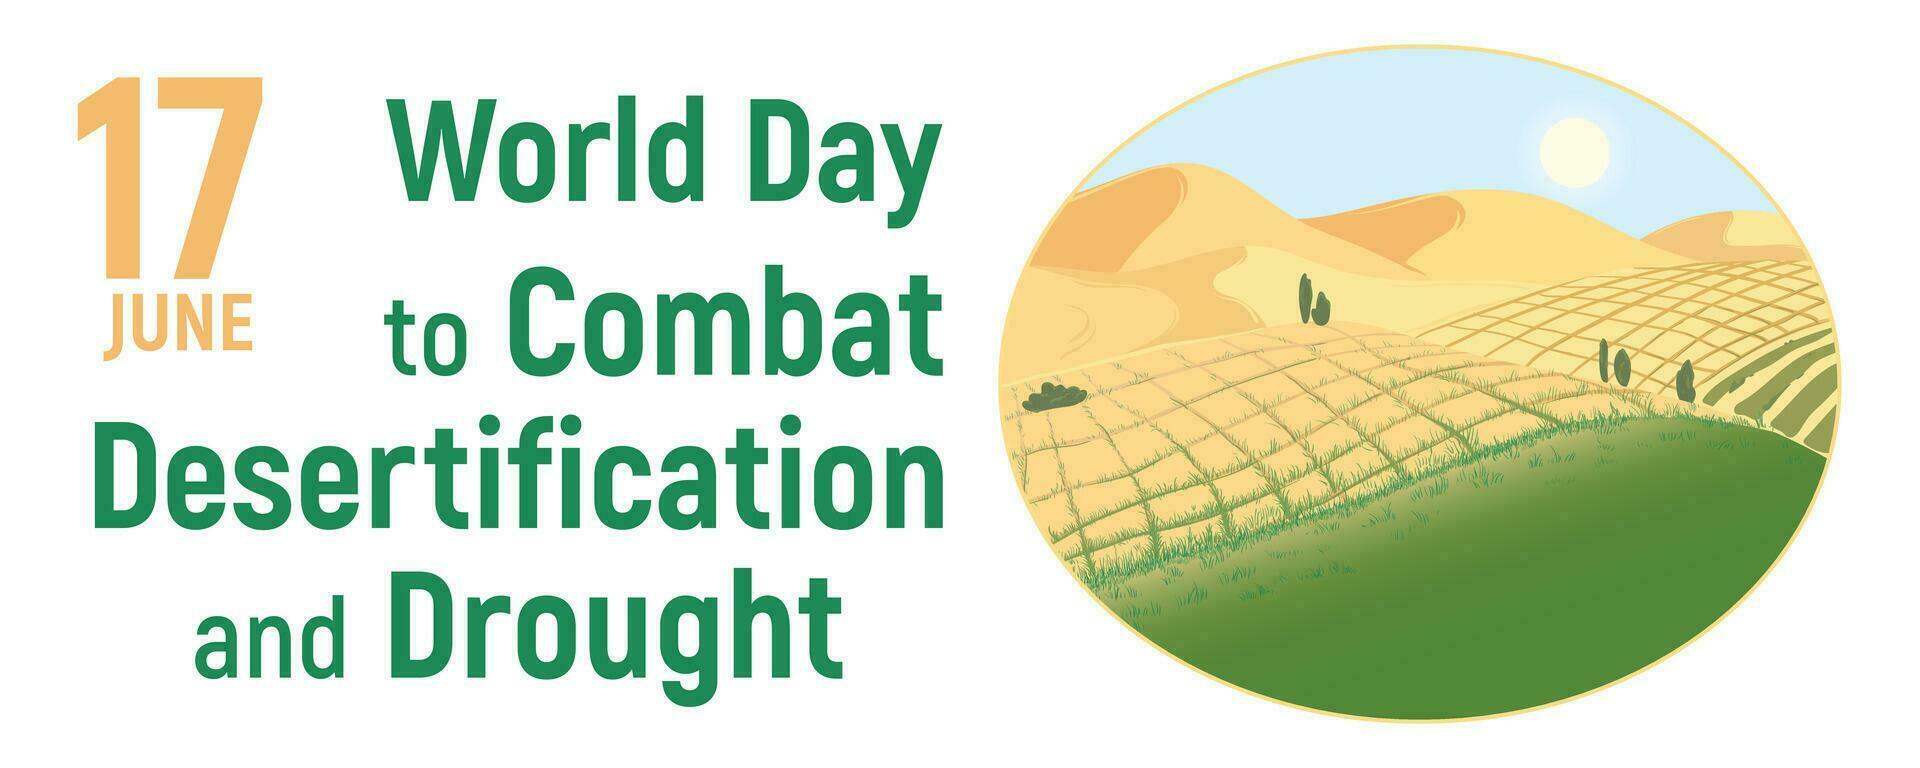 June 17 - World Day to Combat Desertification and Drought. Vector illustration.